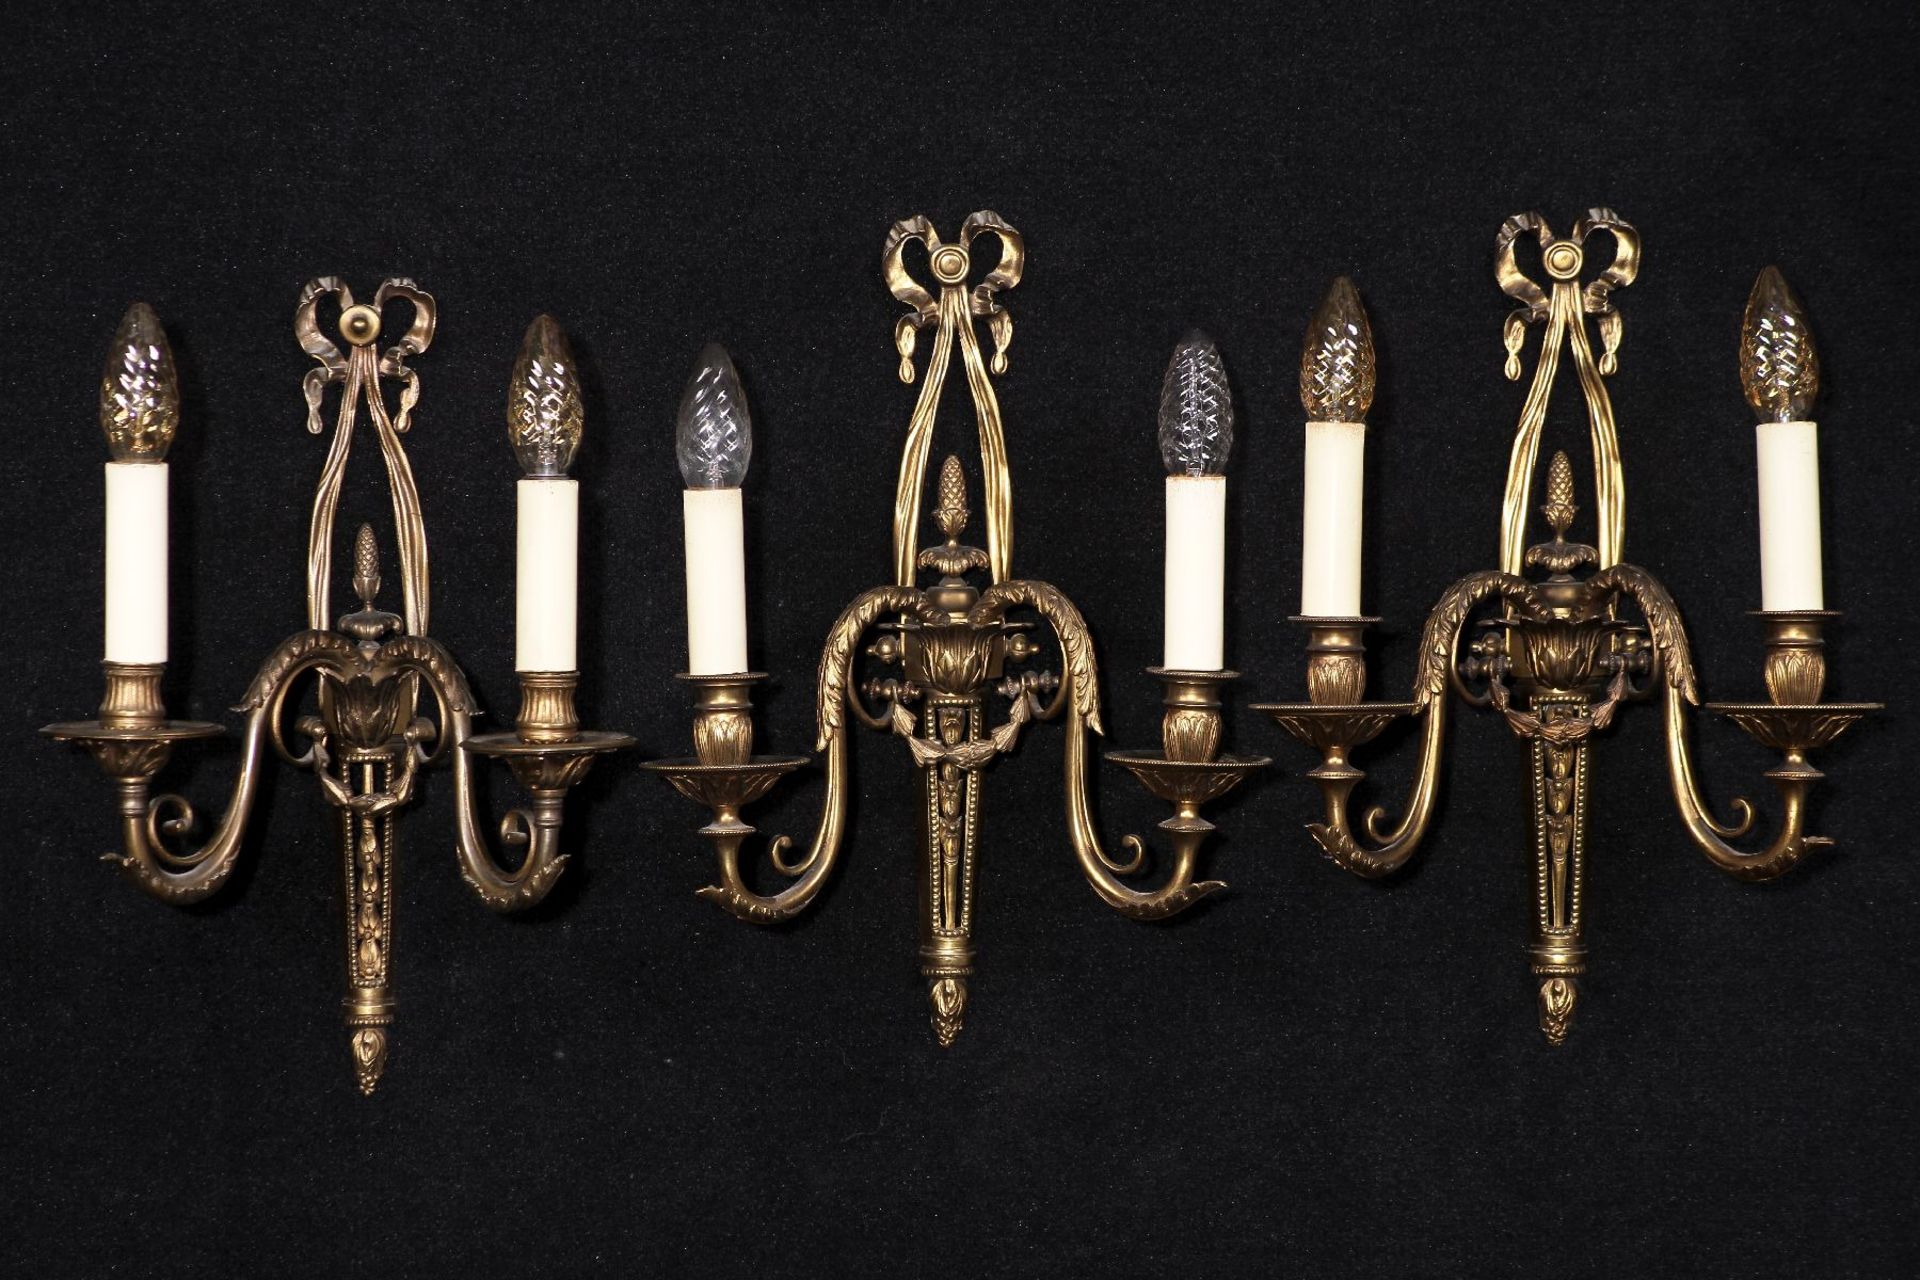 3 wall lights, metal fire-gilt, decorative elements in shape of acanthus leaves and loops, each with